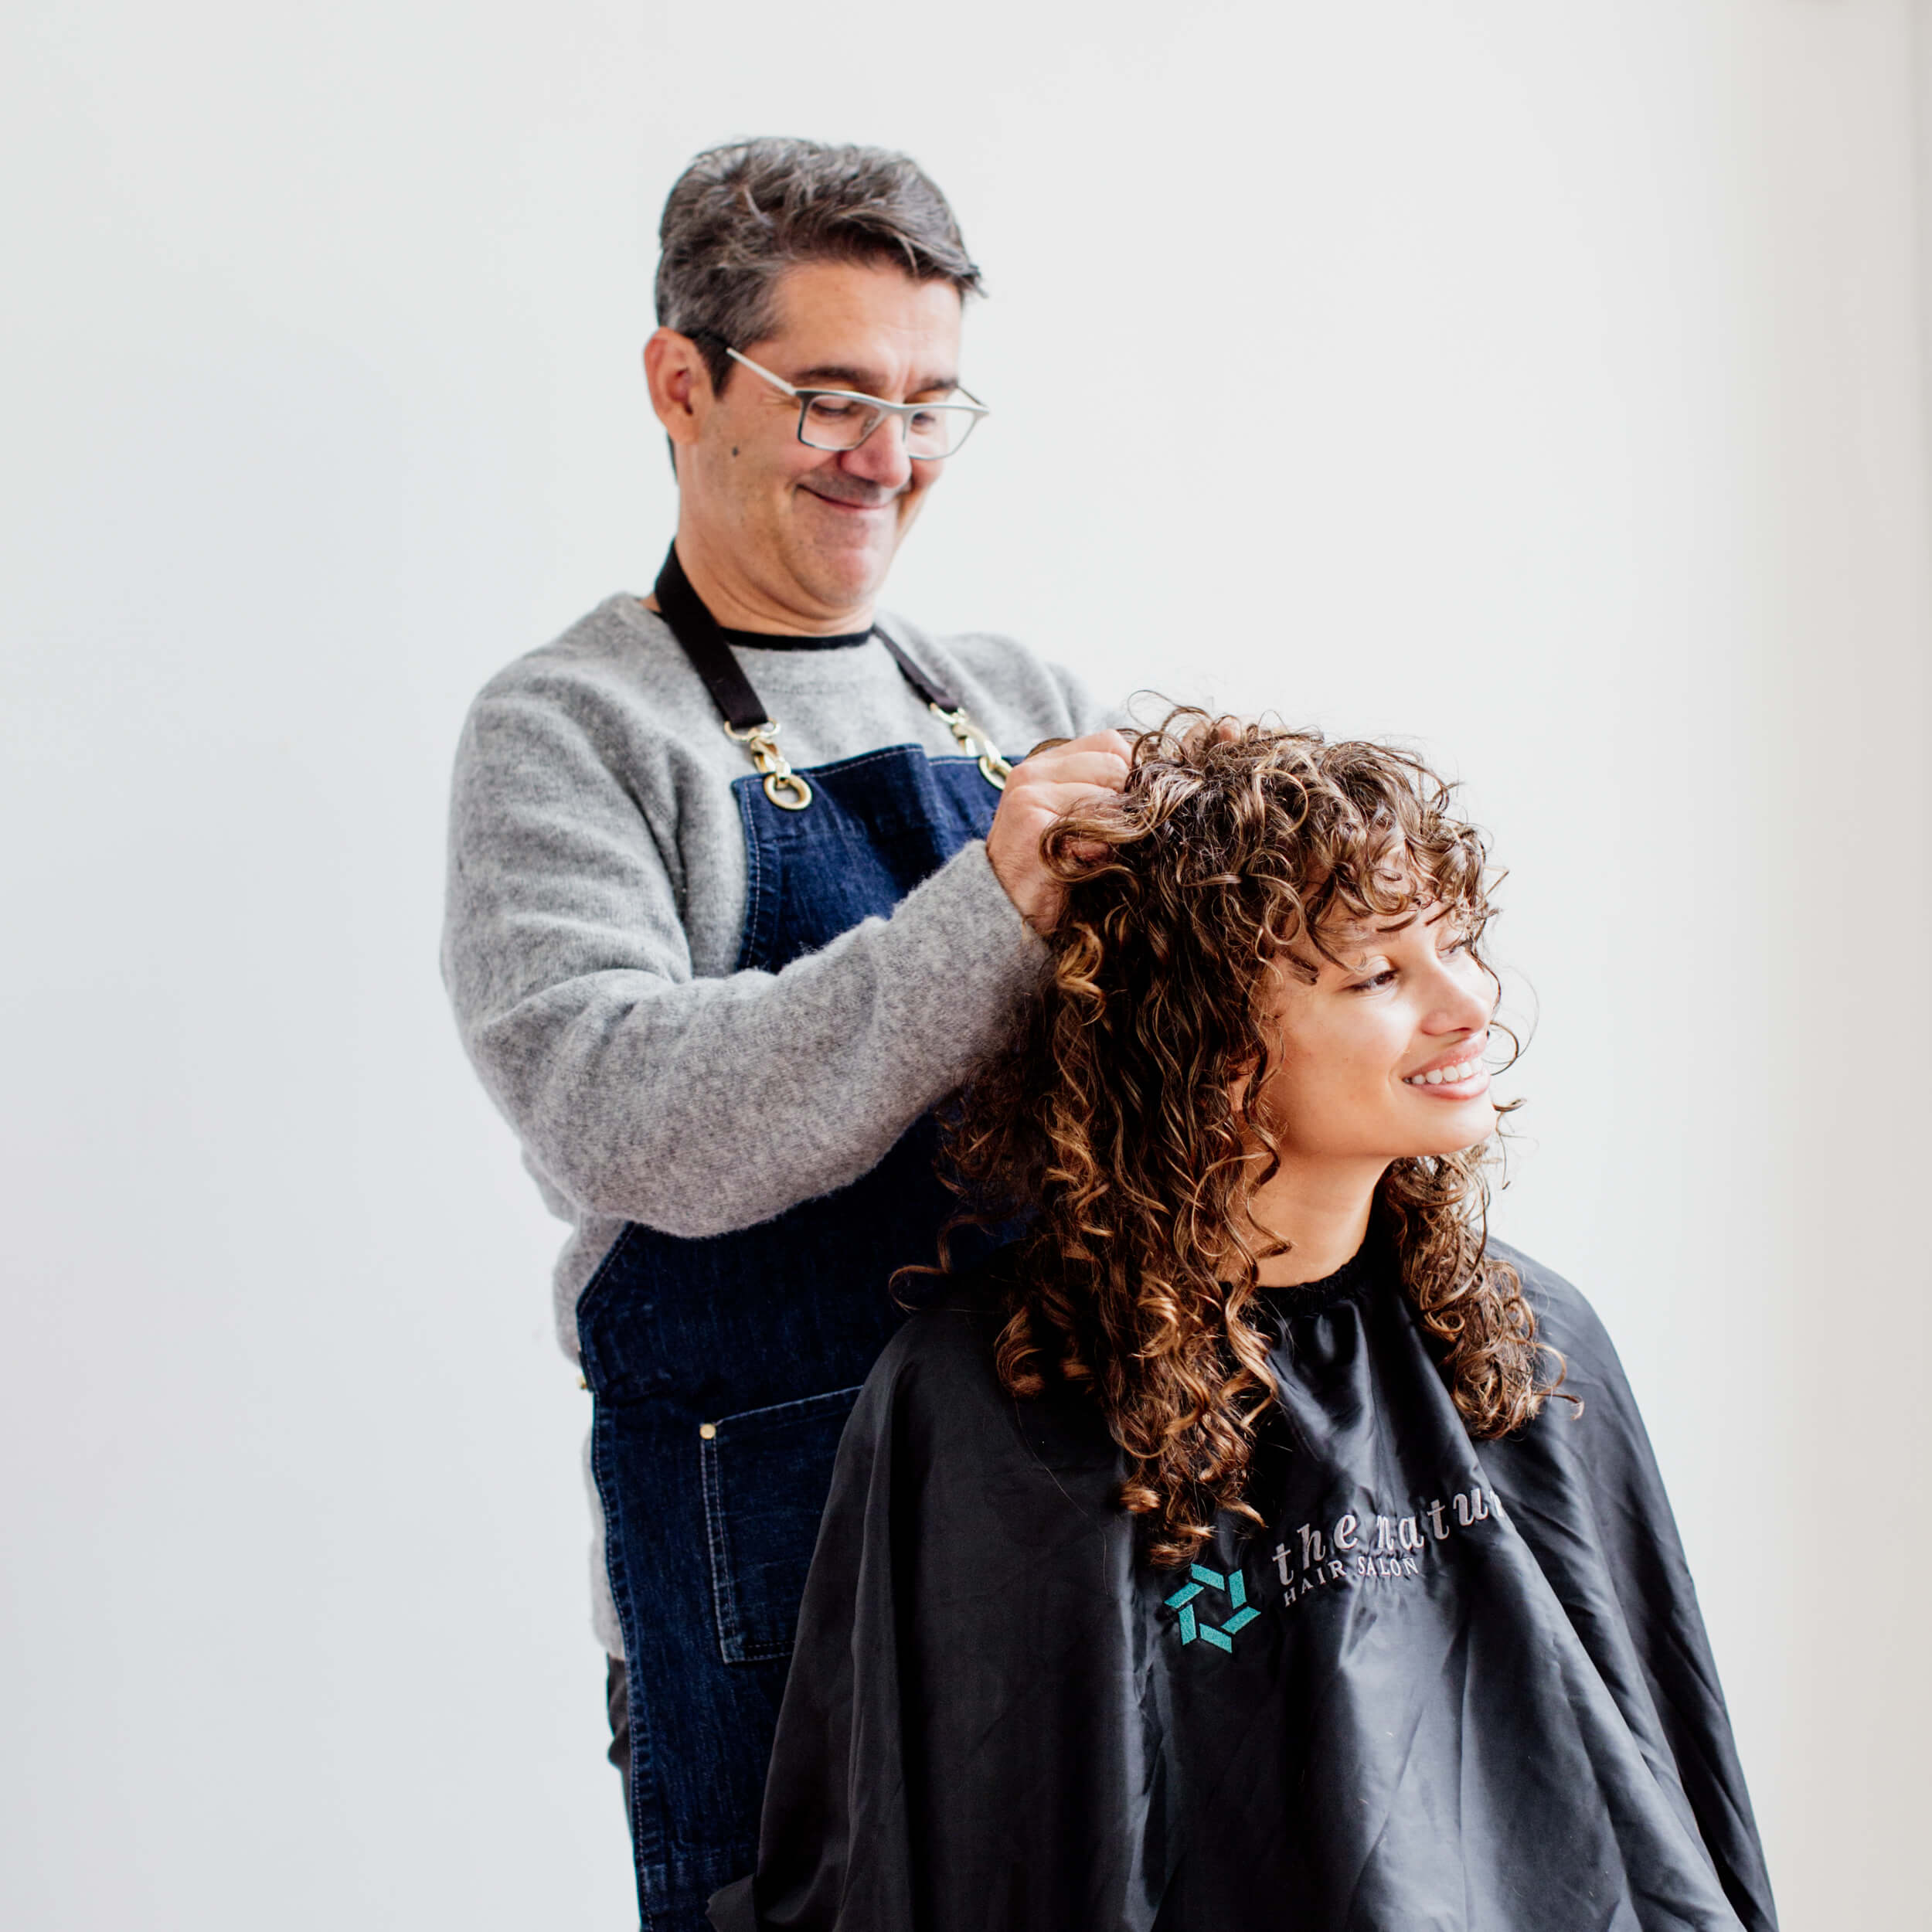 A hairdresser works on a client's hair.